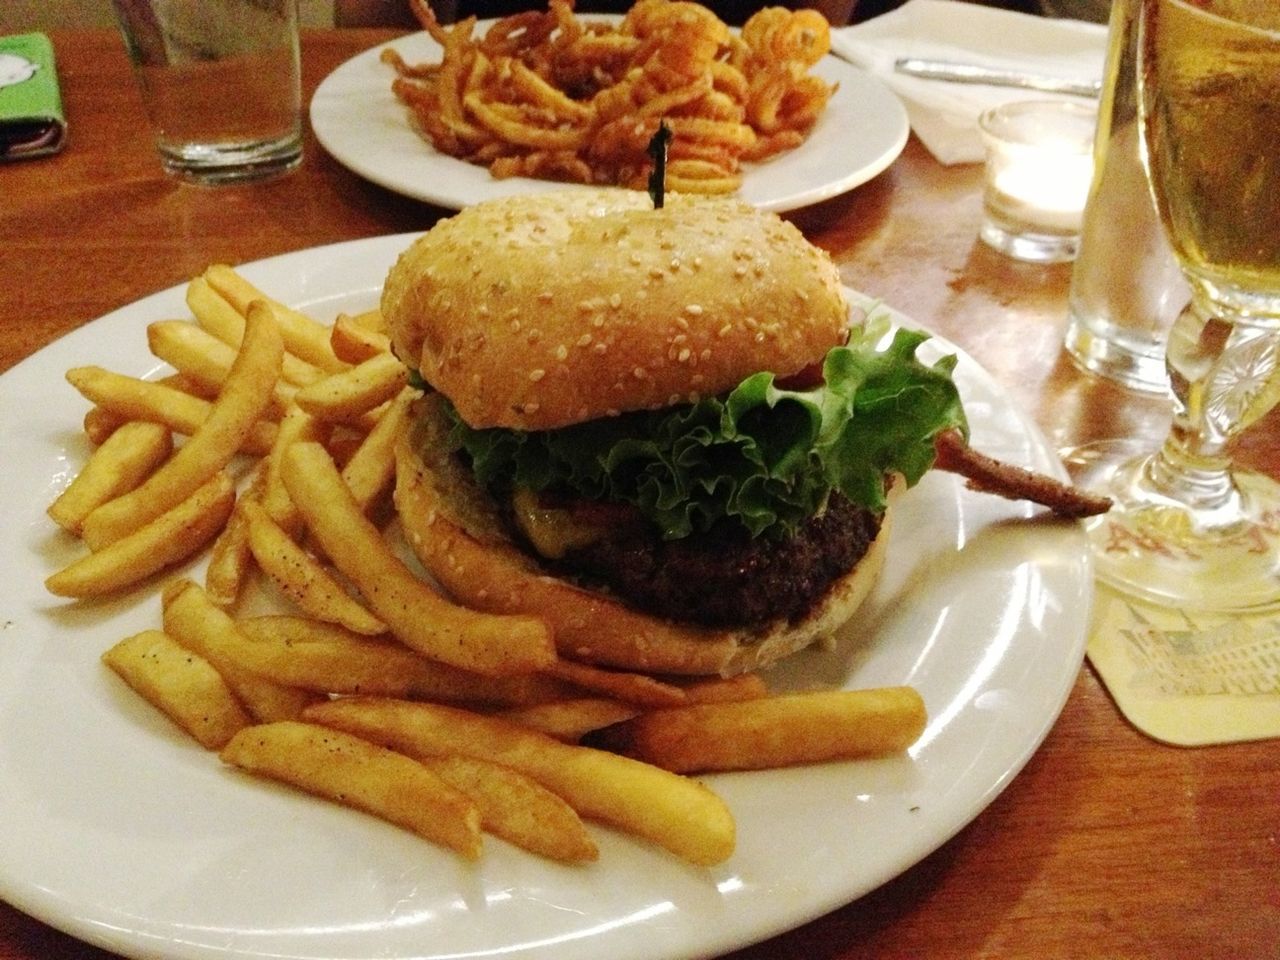 Close-up of fries with burger on table